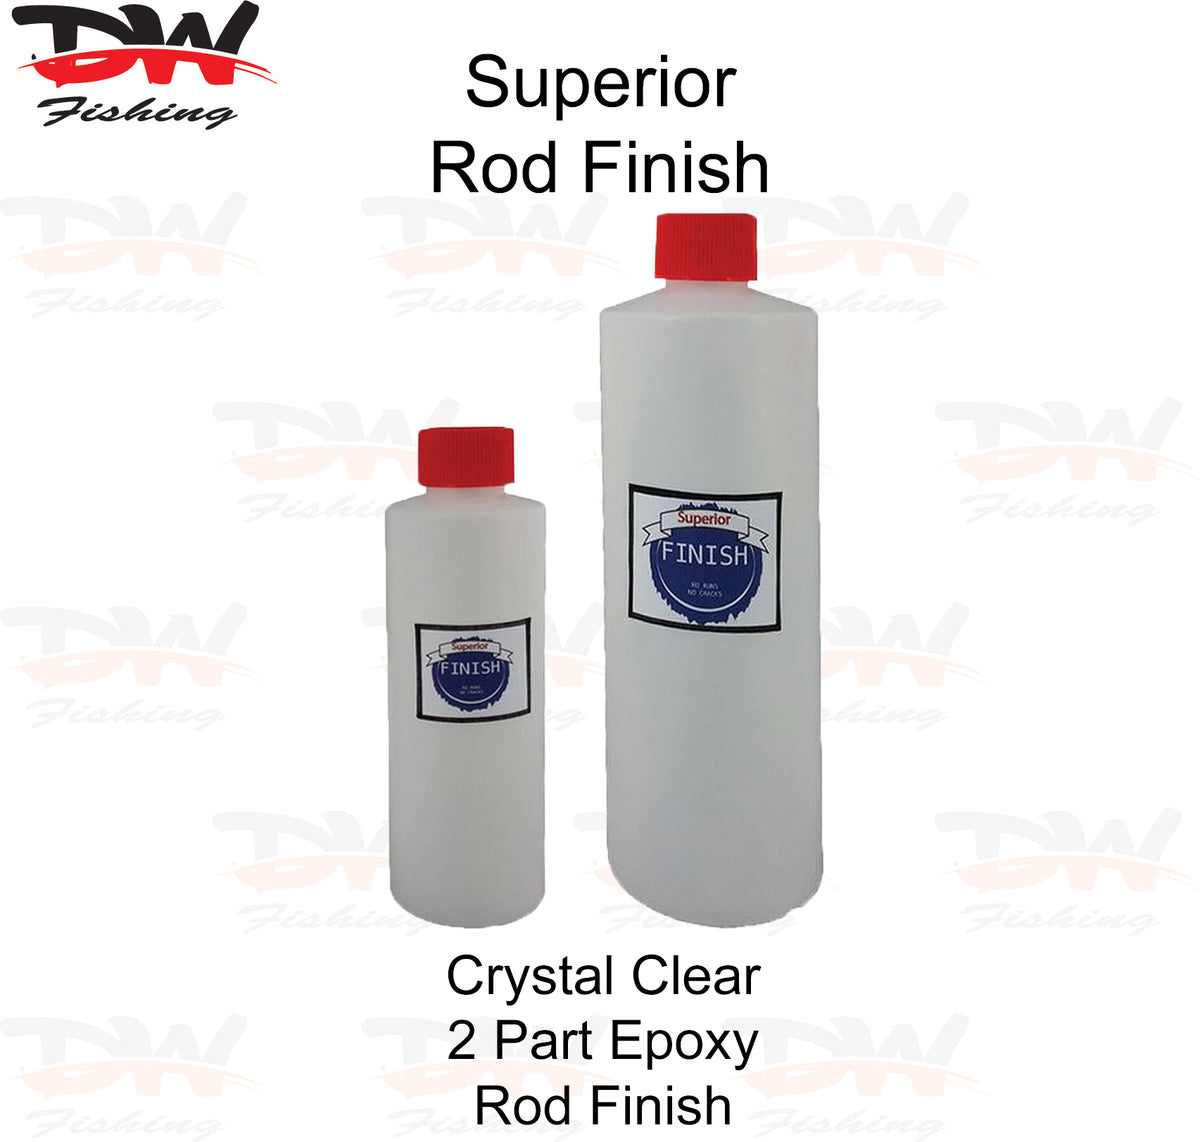 Crystal Clear Epoxy Rod Finish | Rod Building | Dave's Tackle Bag